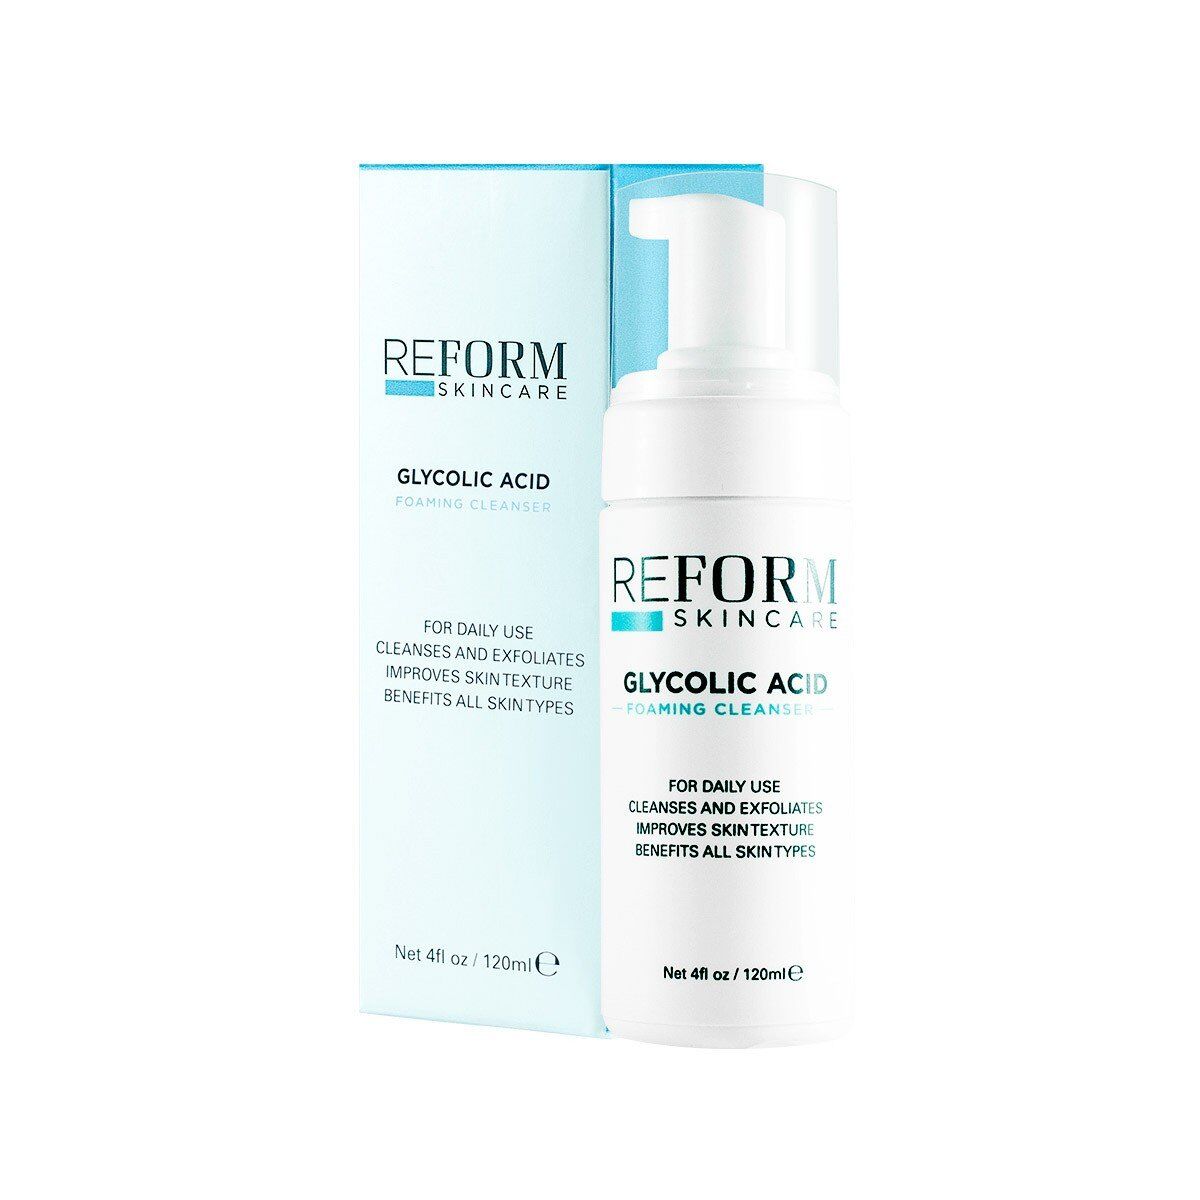 Reform Skincare - Glycolic Acid Foaming Cleanser